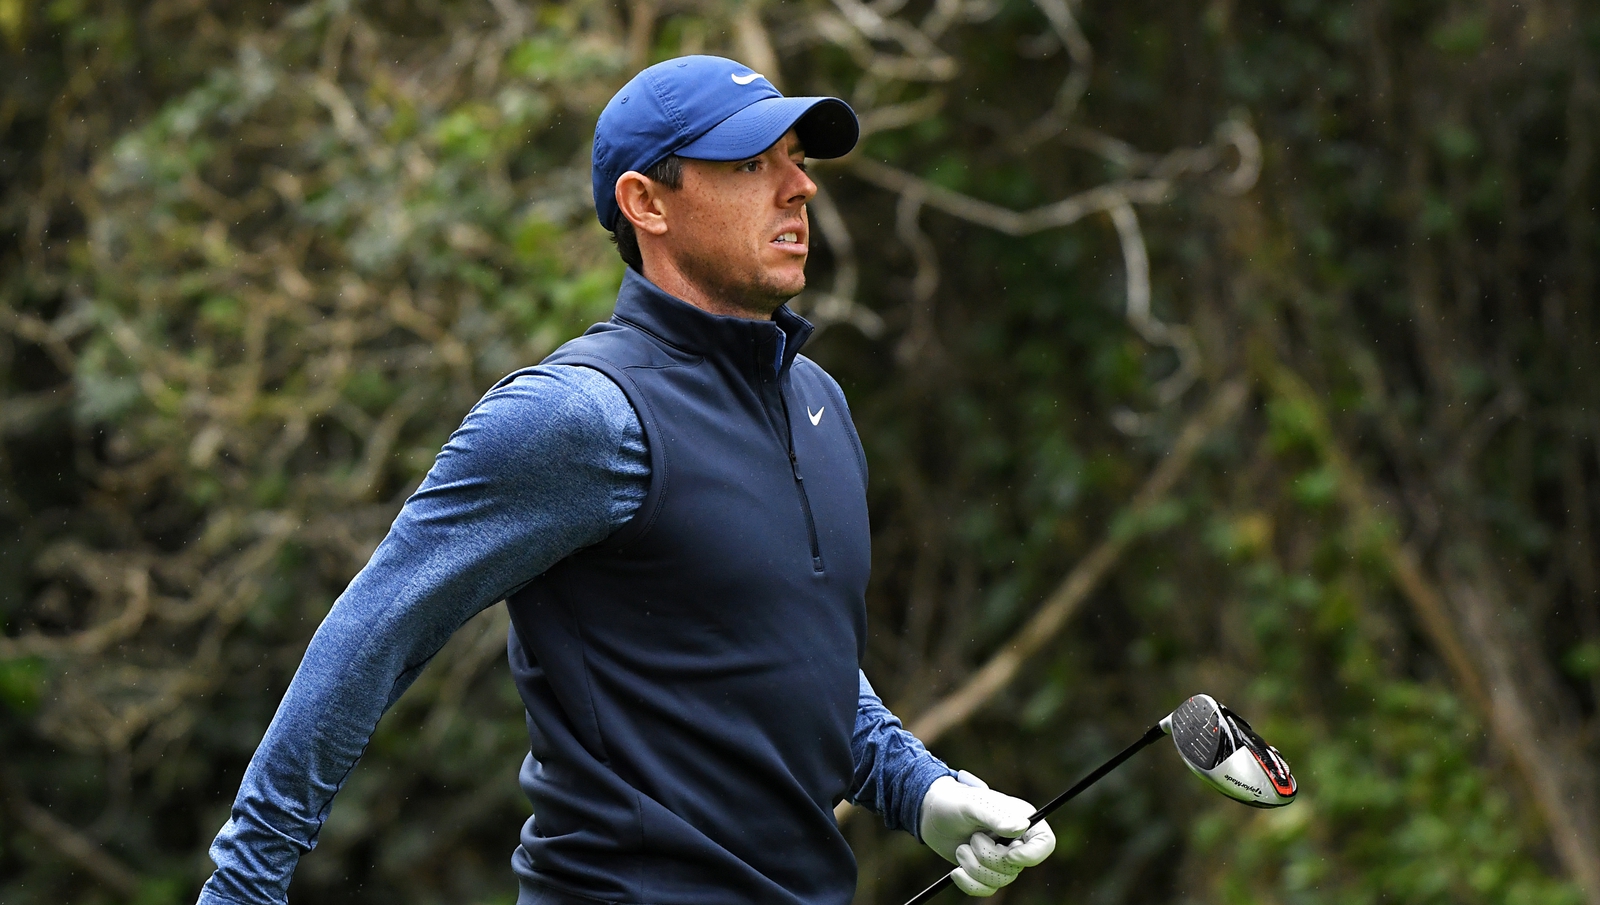 McIlroy moves up leaderboard at Genesis Open